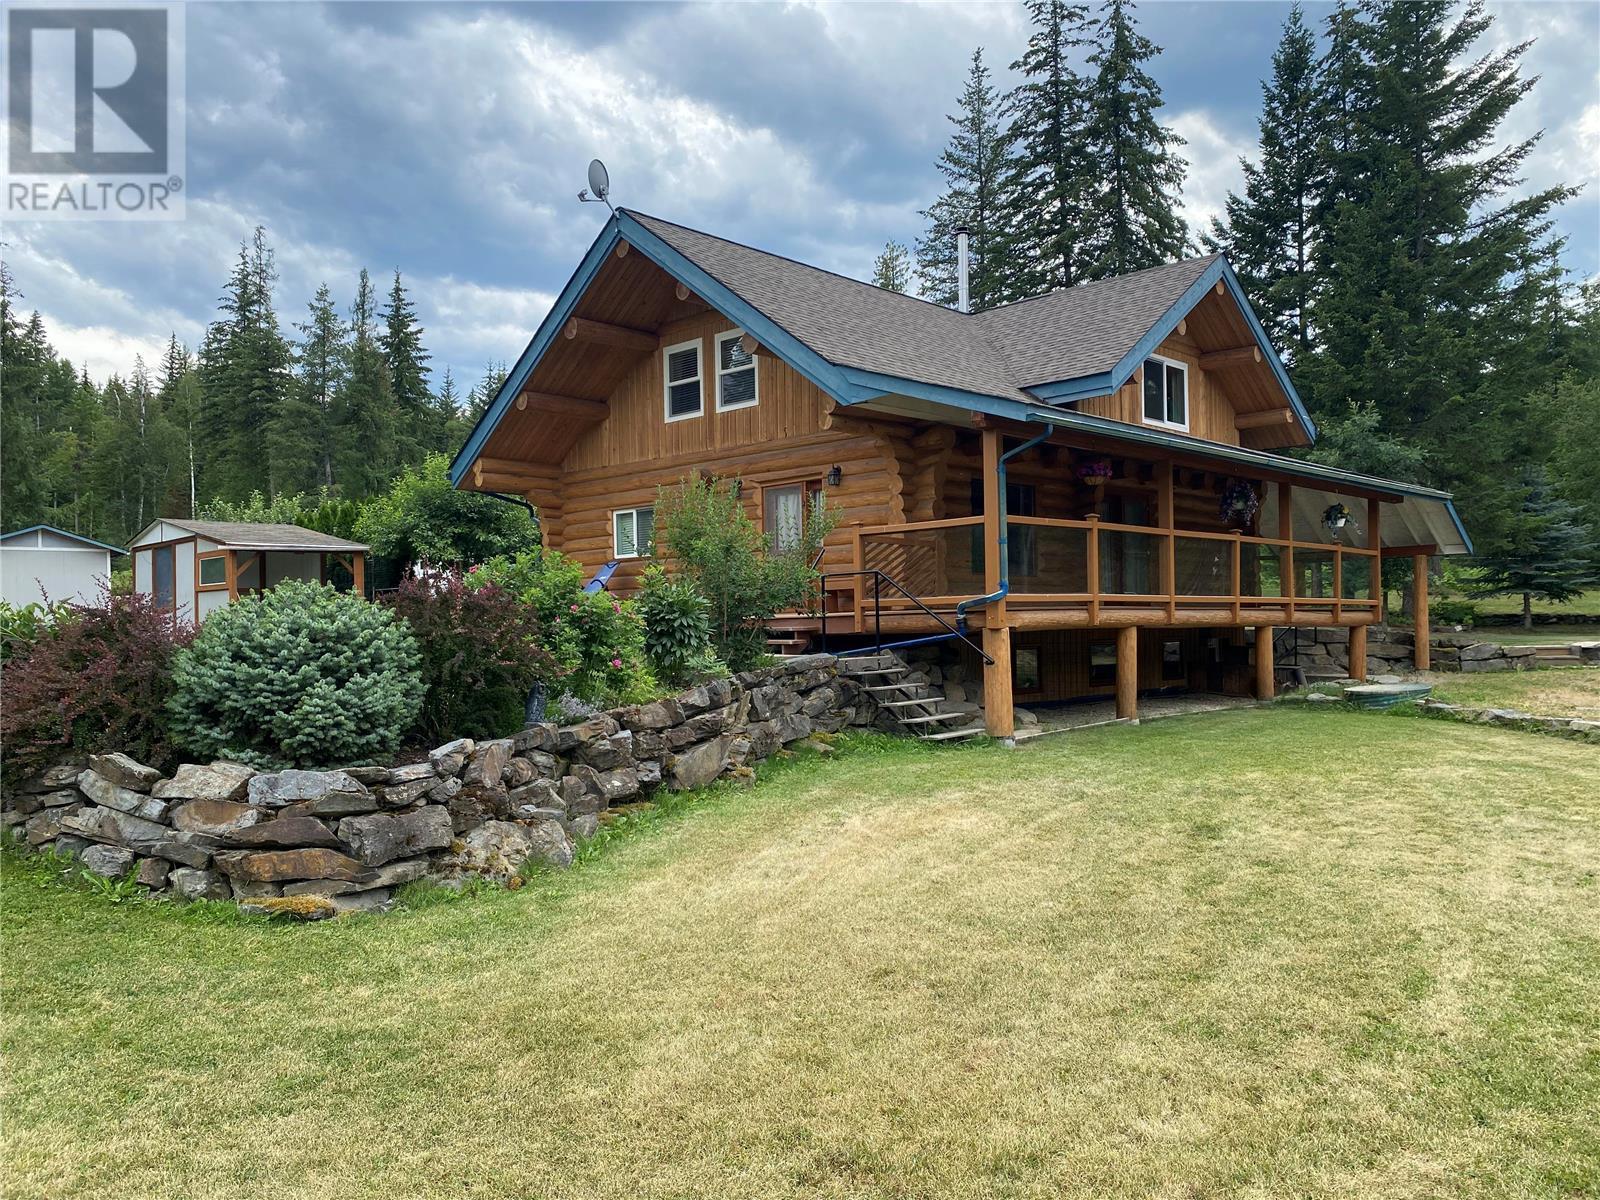 86 Campbell Road located in Cherryville, British Columbia